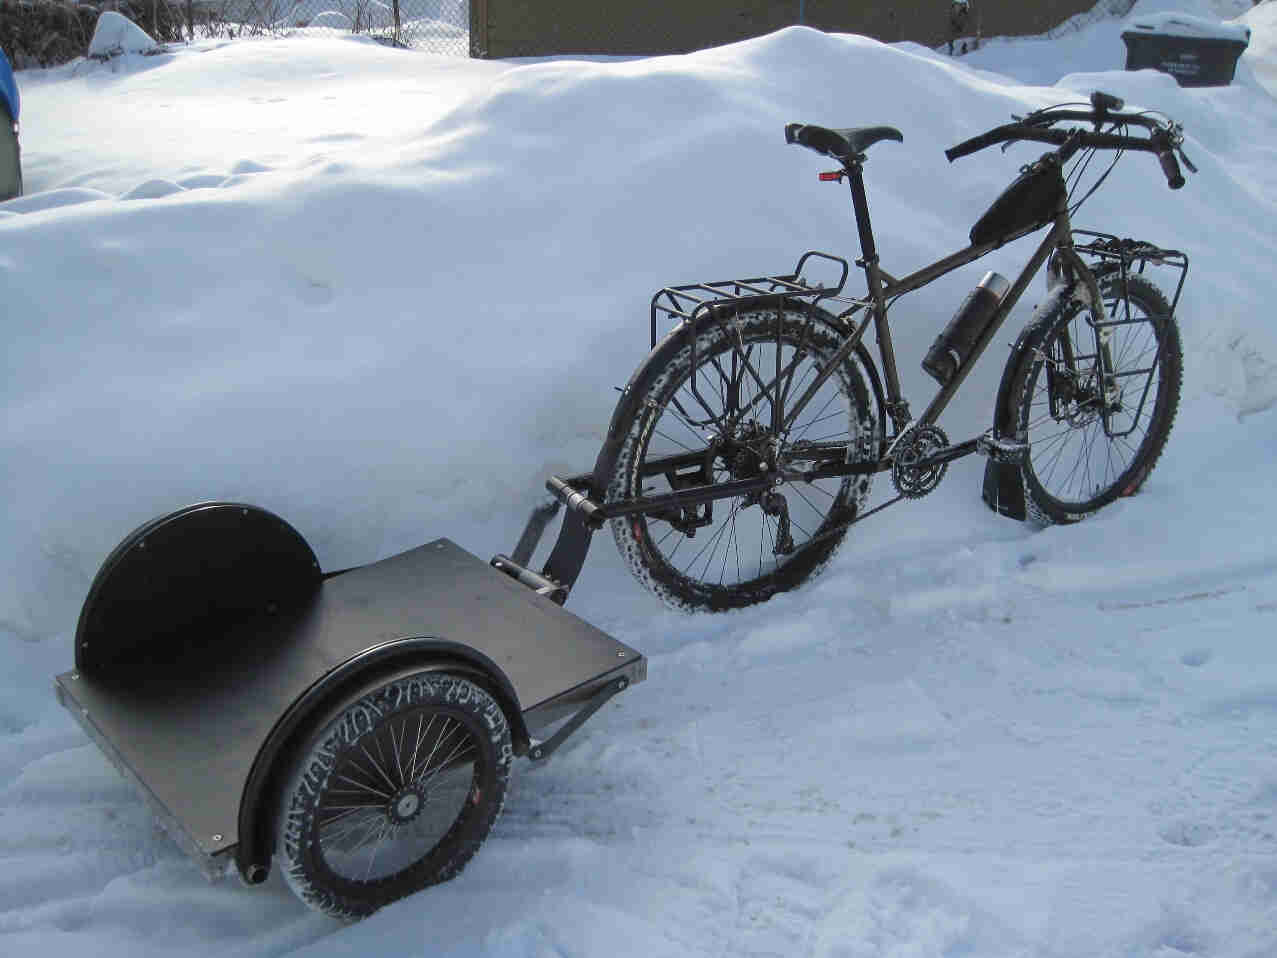 Right side view of a Surly Troll bike with a bike trailer hitched back on back, parked against a high snow bank